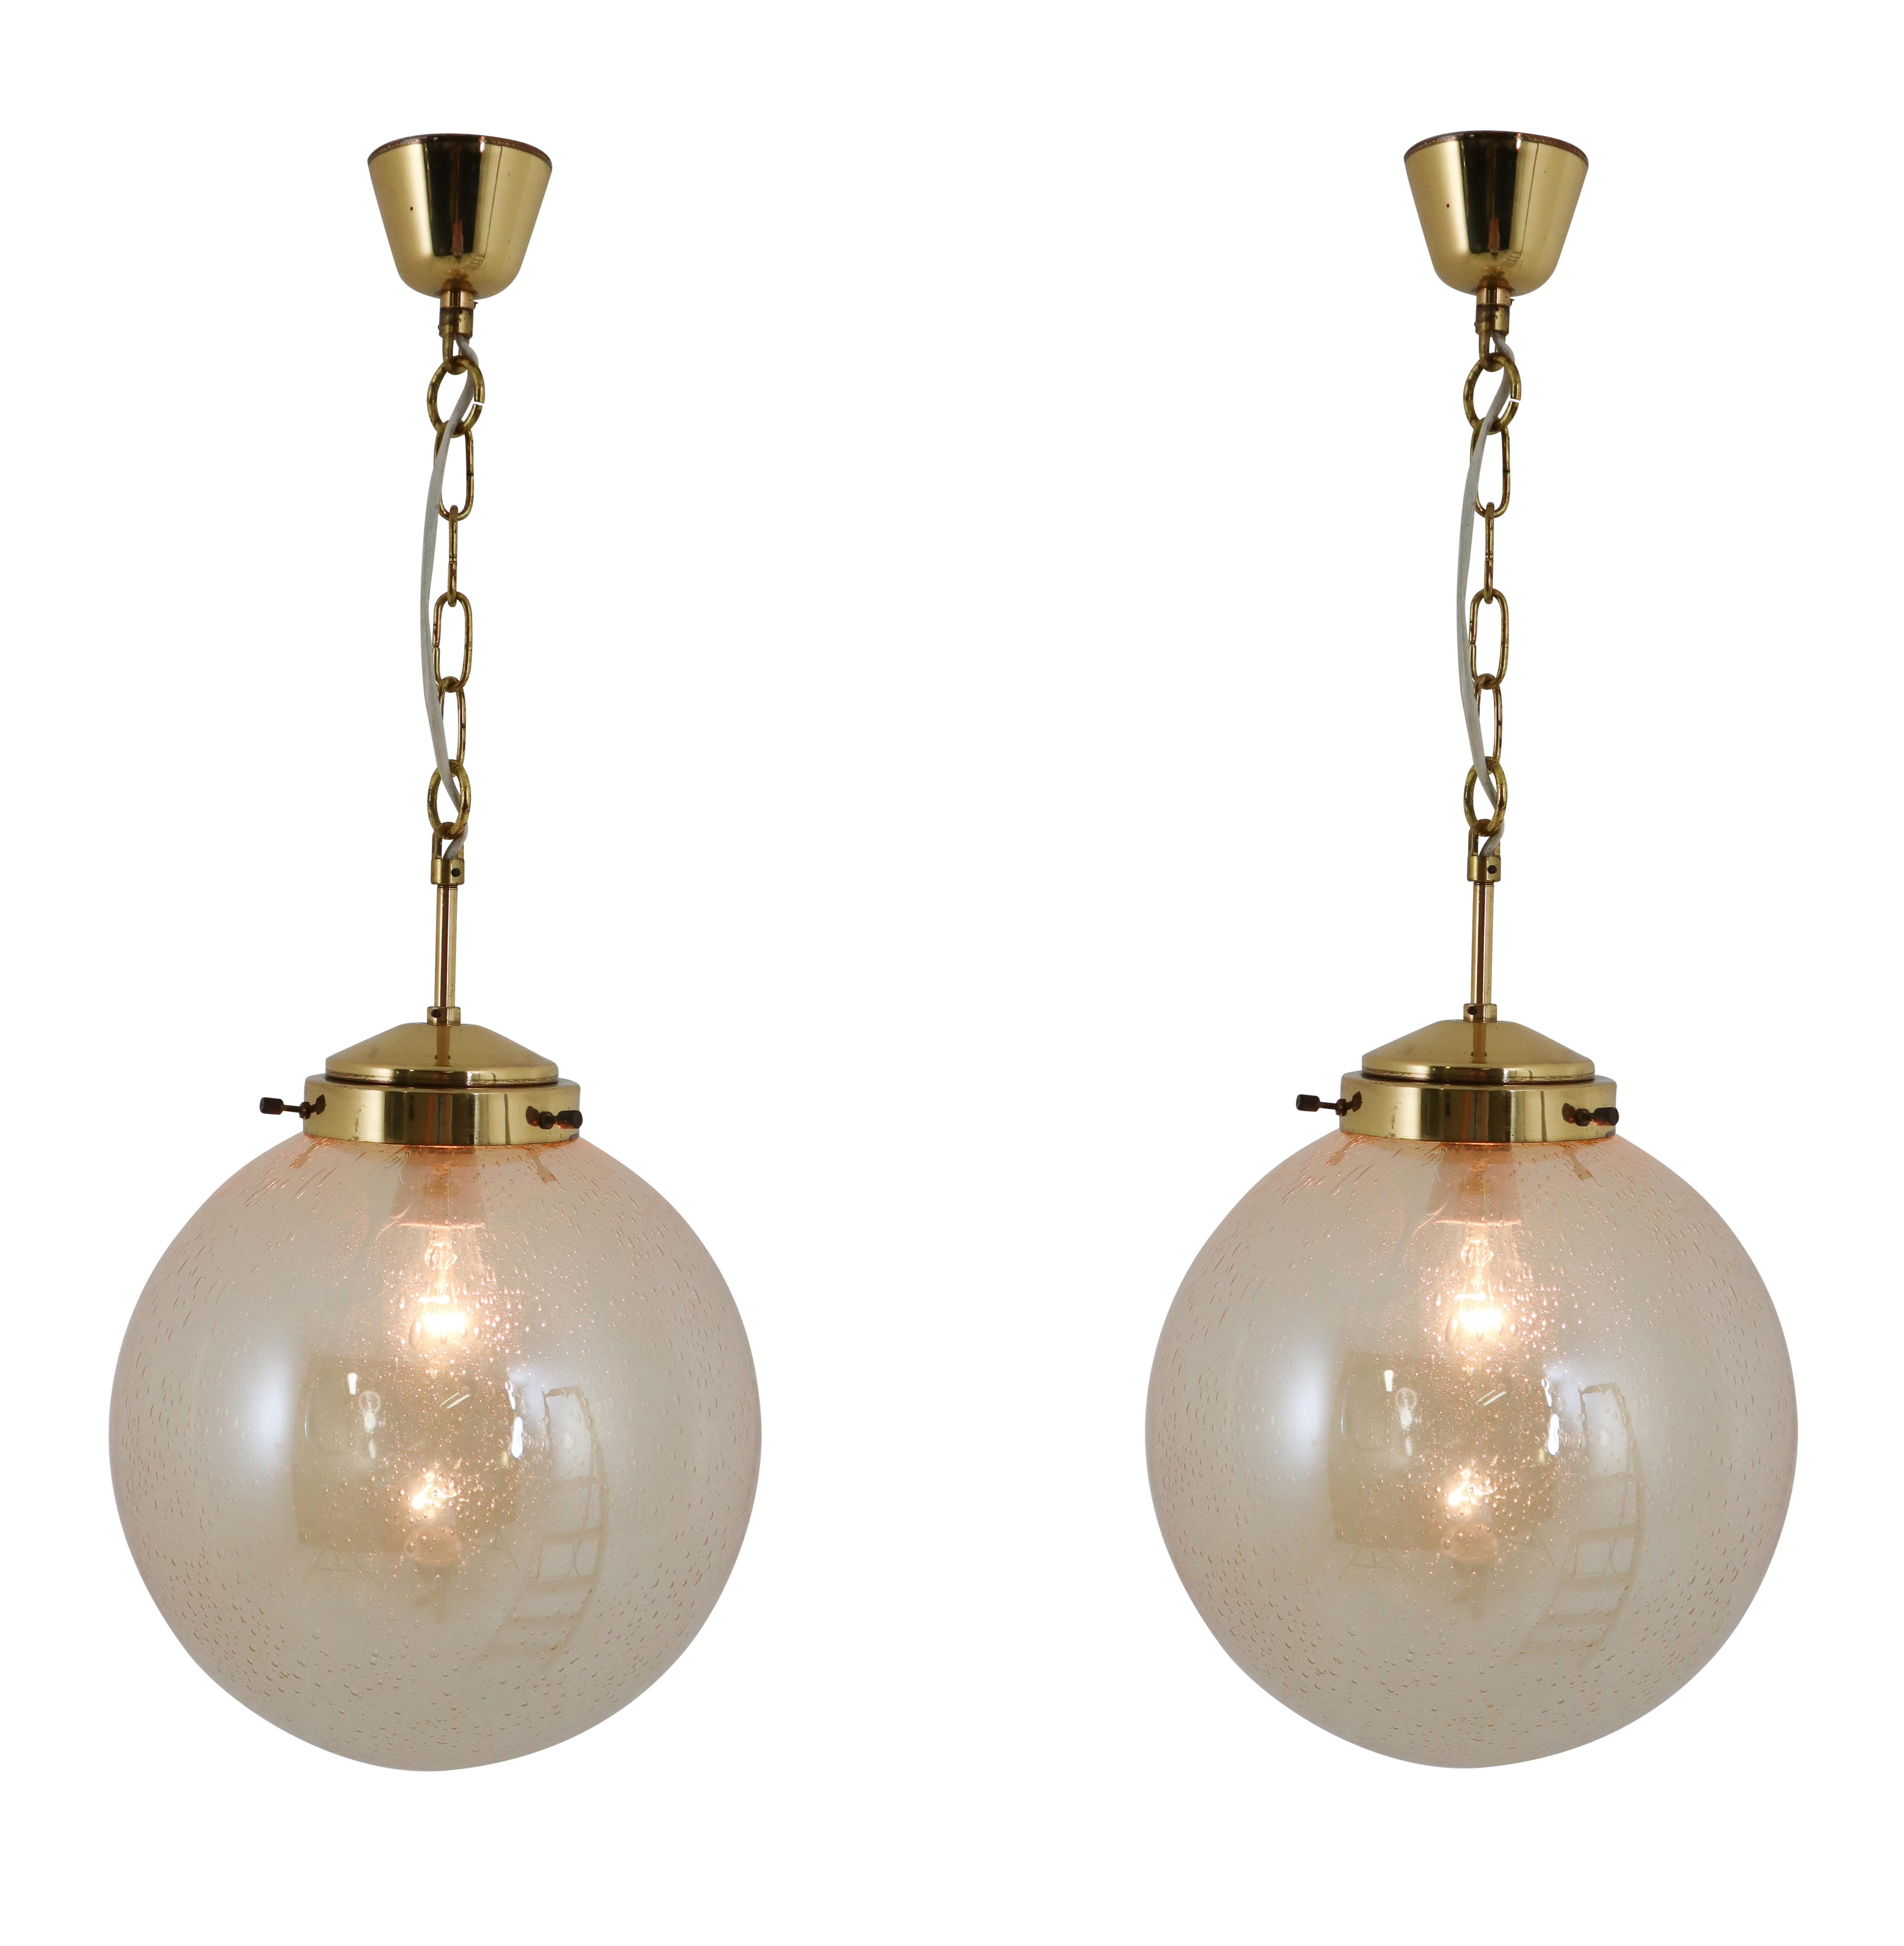 Set of Two Globe Pendant Lights, Brass and Smoked Glass, 1970s